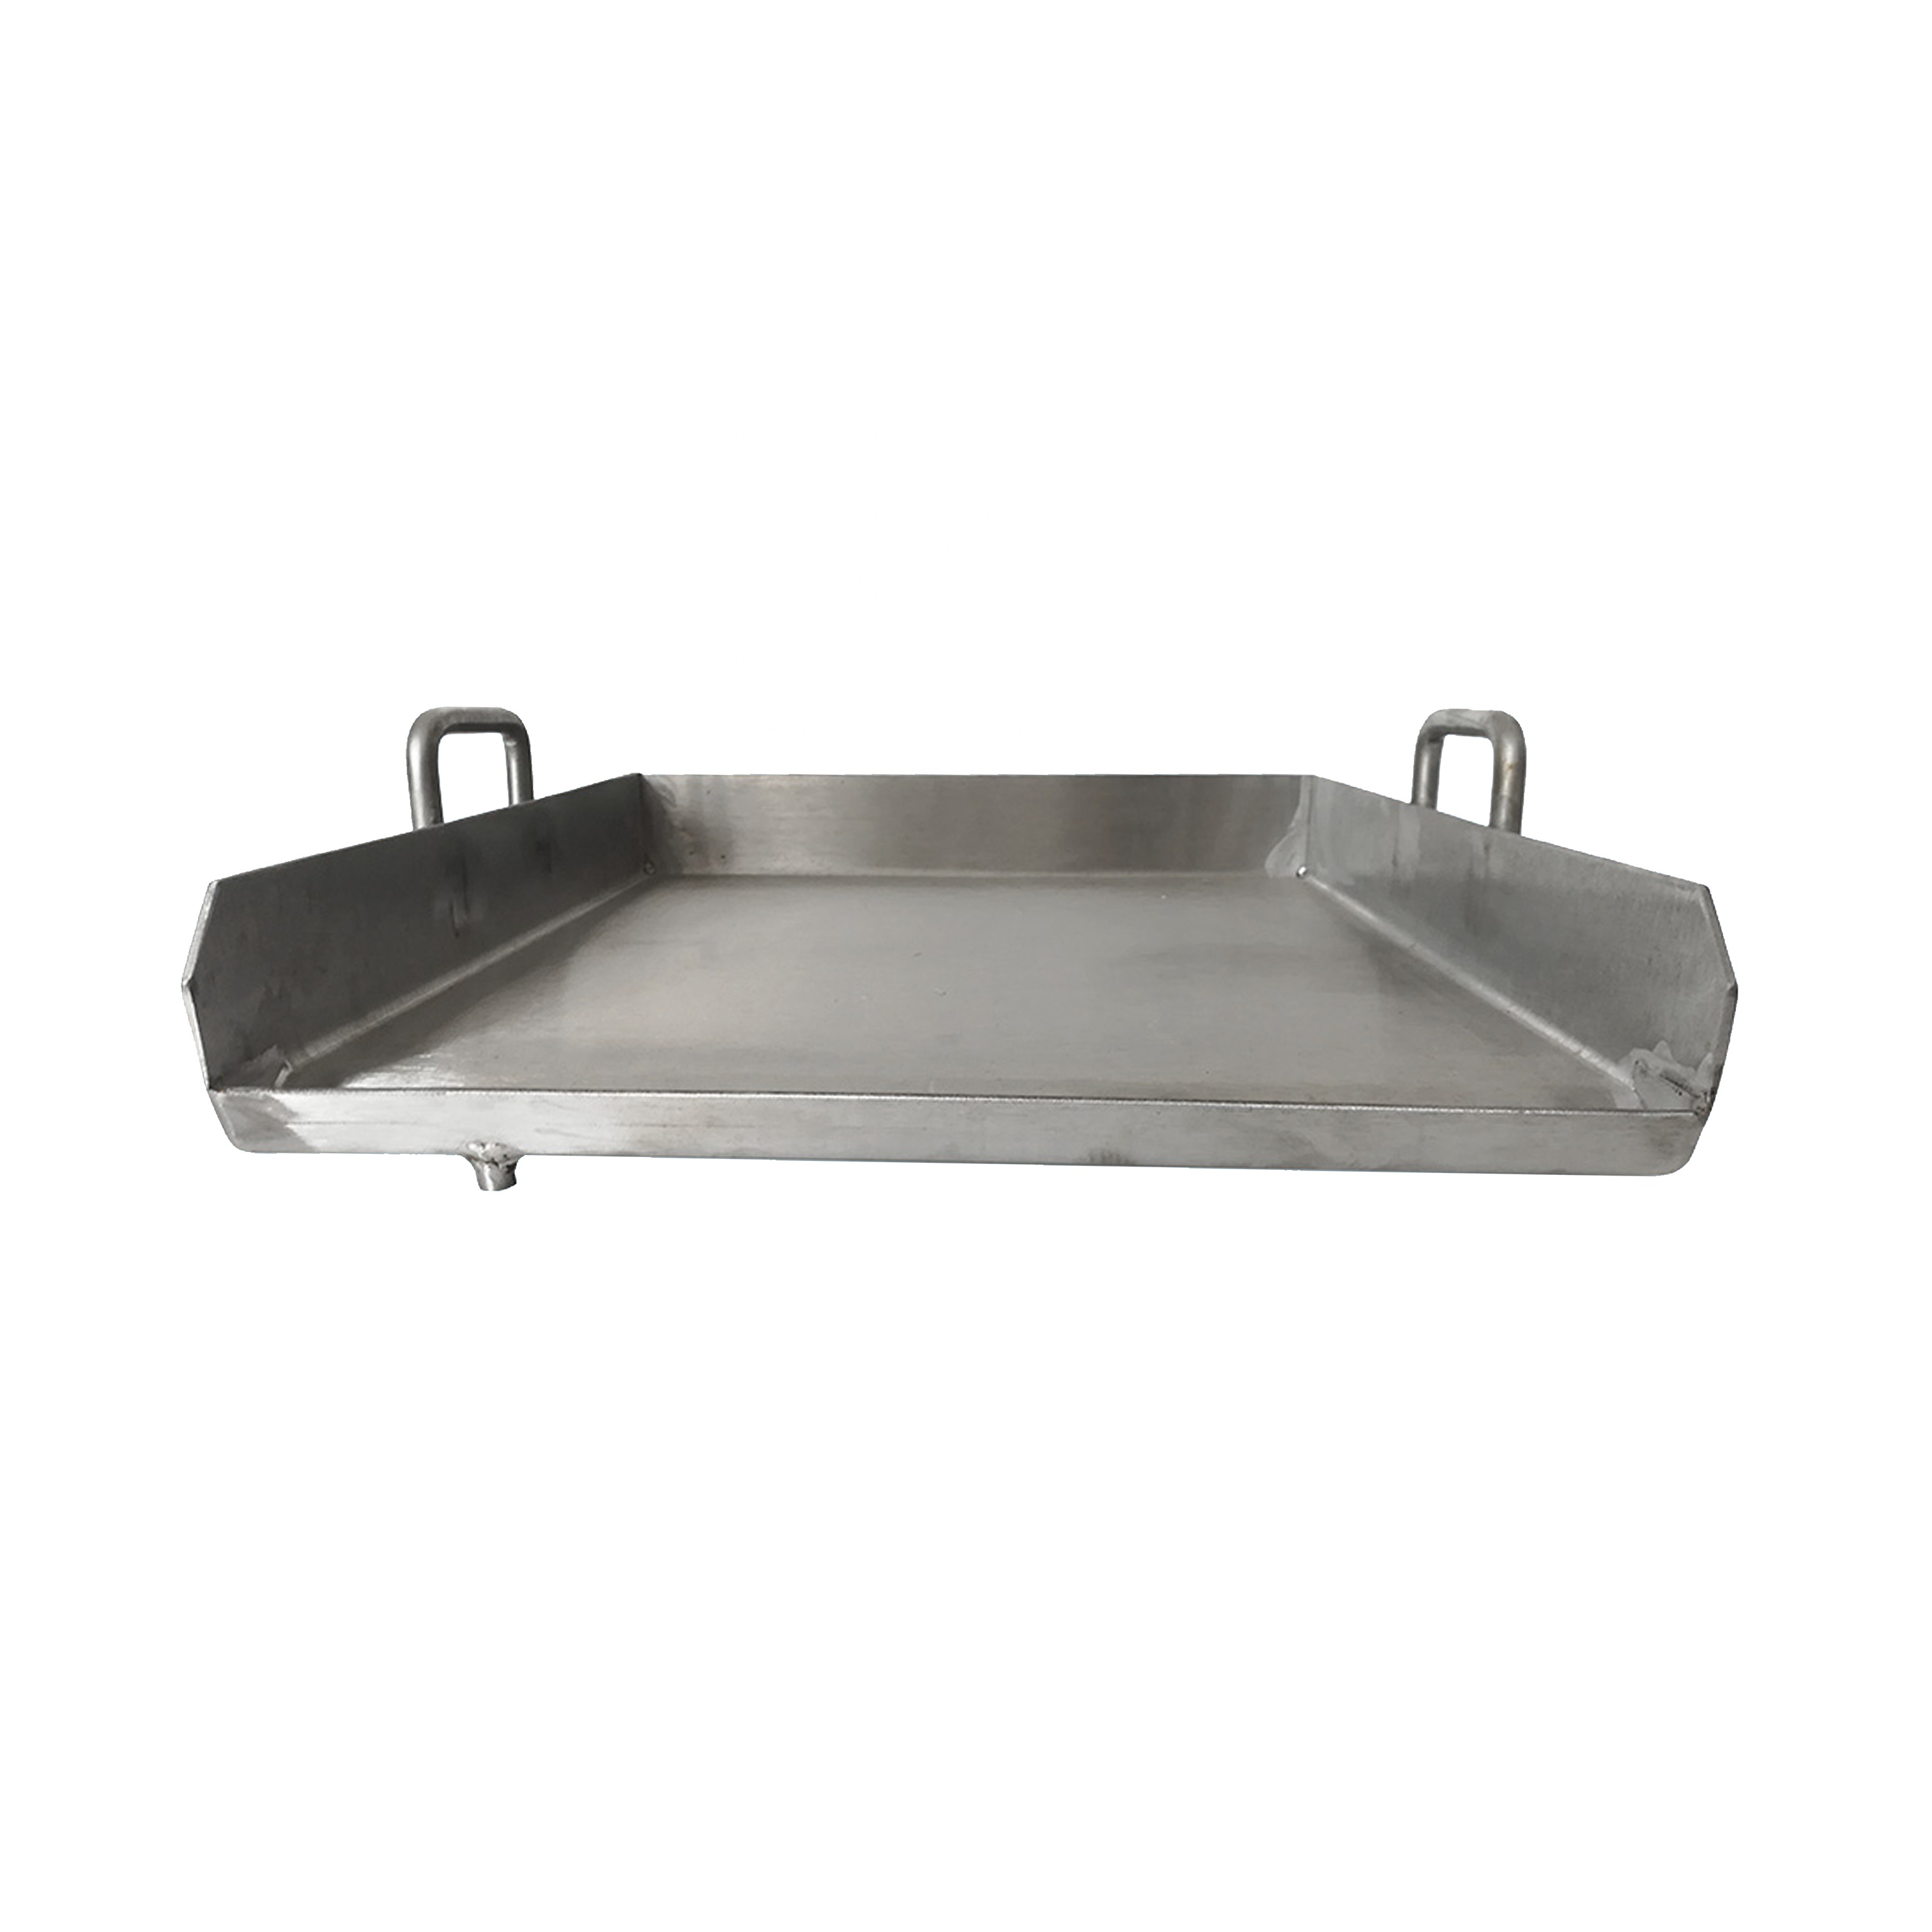 Stainless Steel Griddle Pan with Even Heating Cross Bracing for Charcoal/Gas Grills Camping Tailgating And Parties